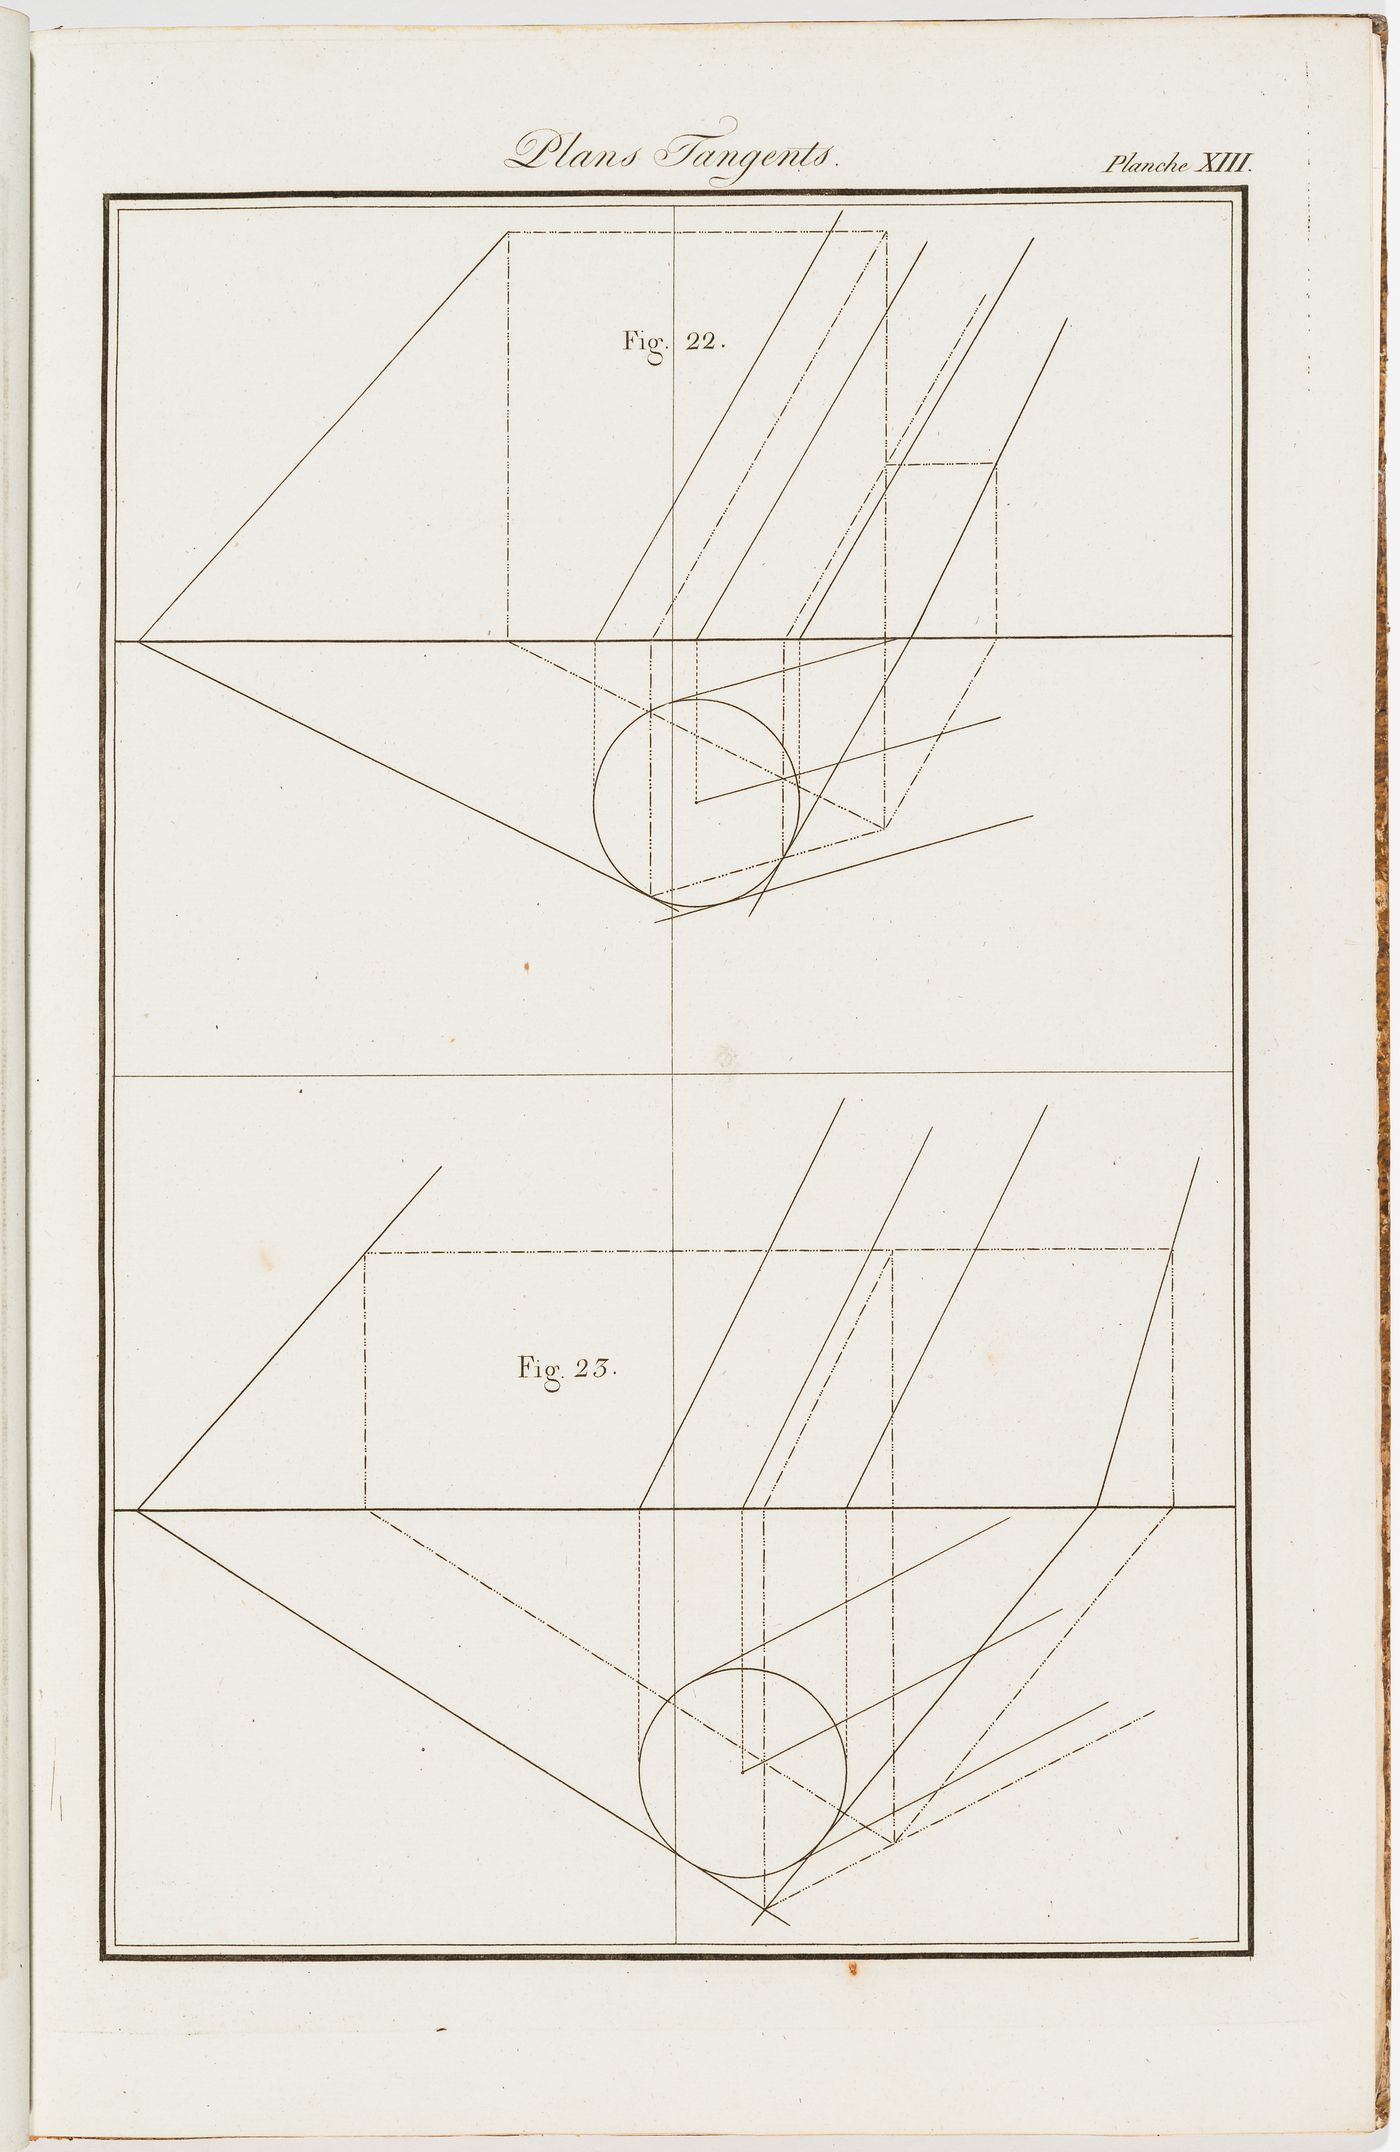 "Plans Tangents": two geometry exercises